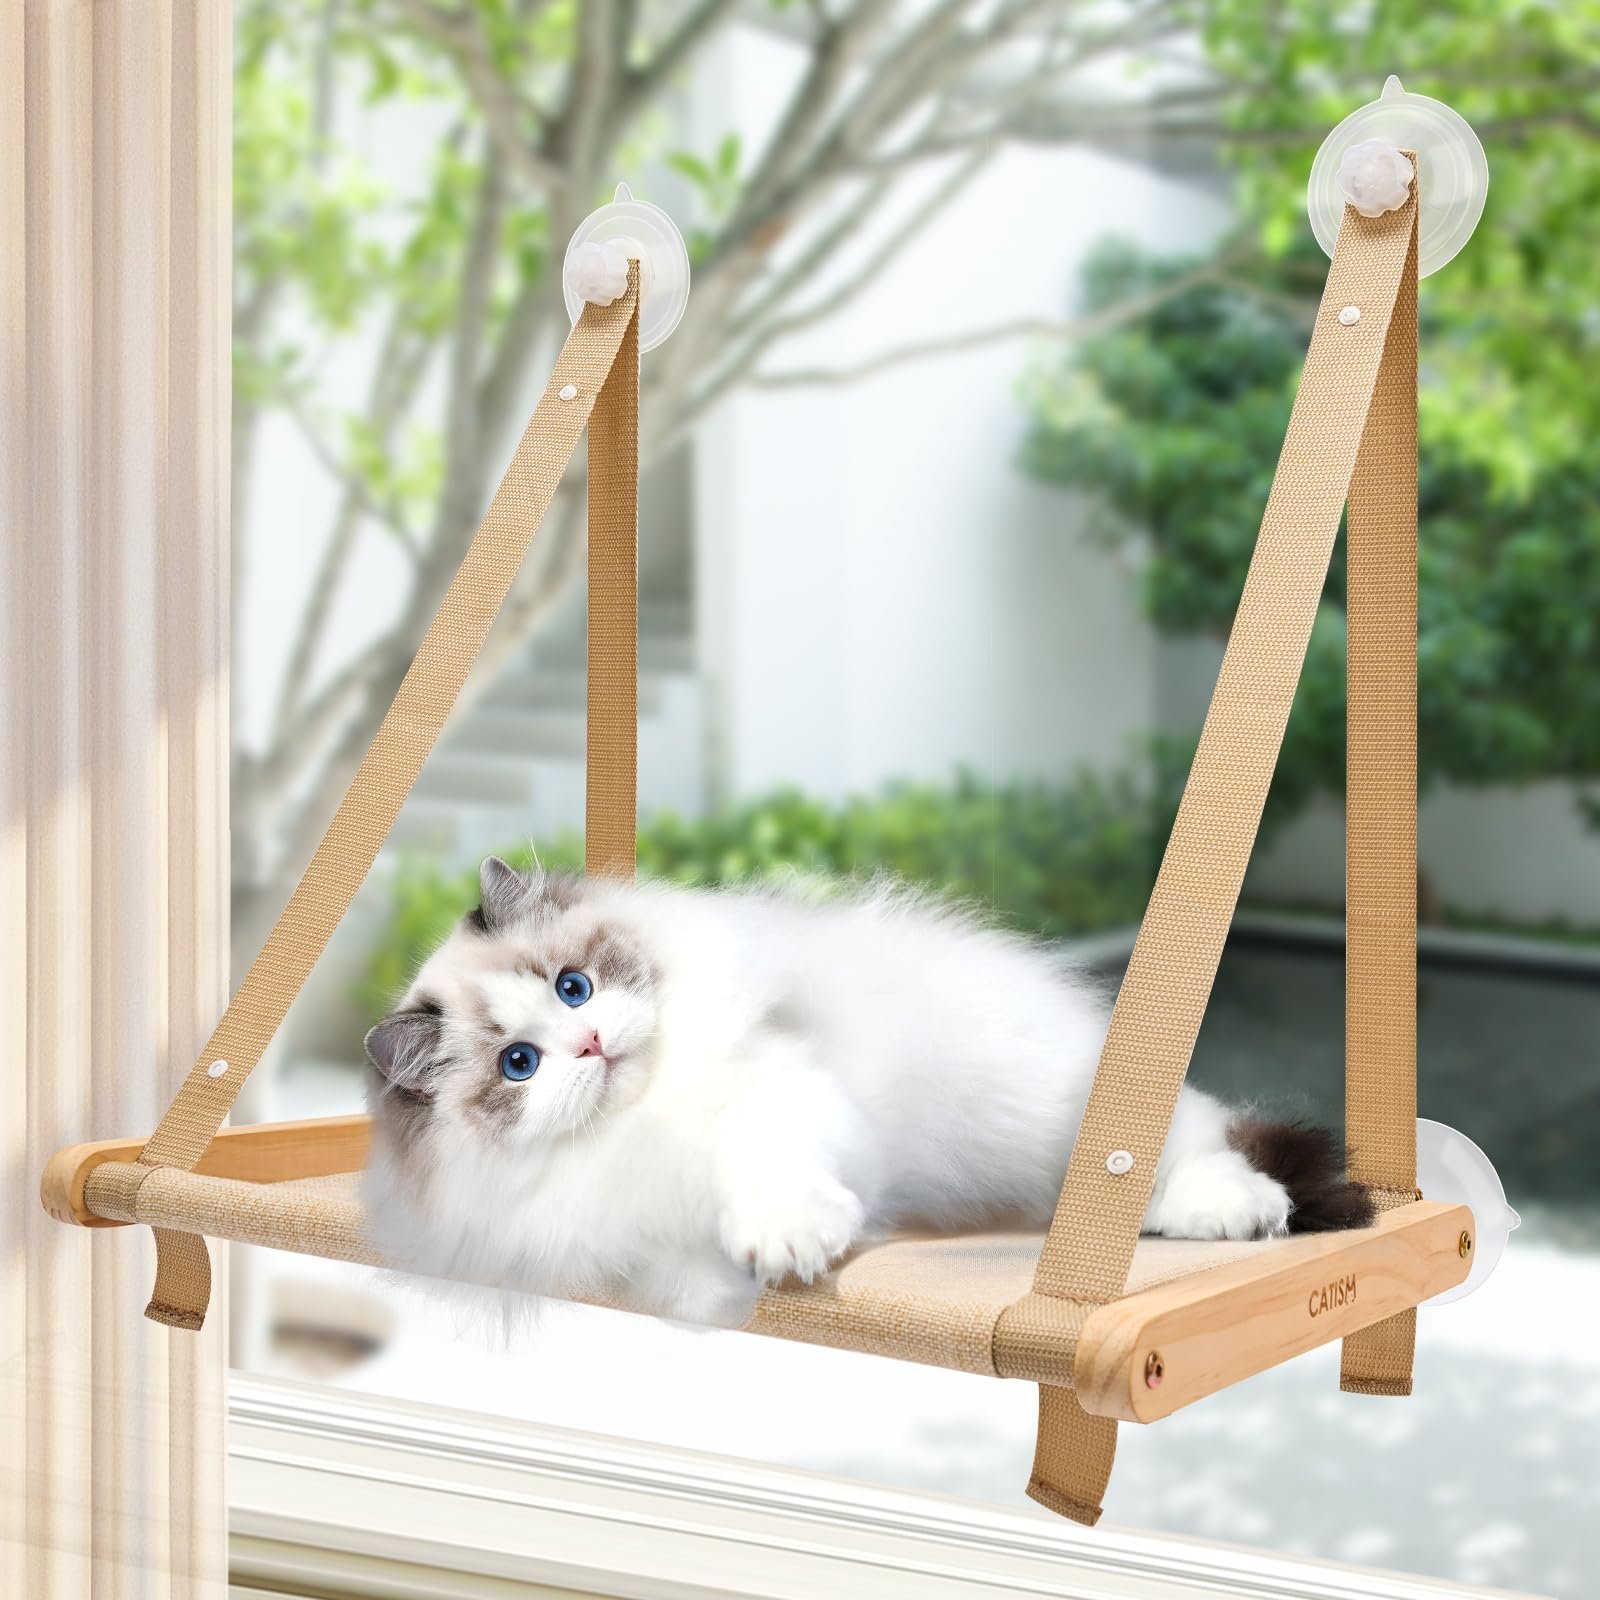 Window Hammocks For Cats Who Like To Hide And Observe